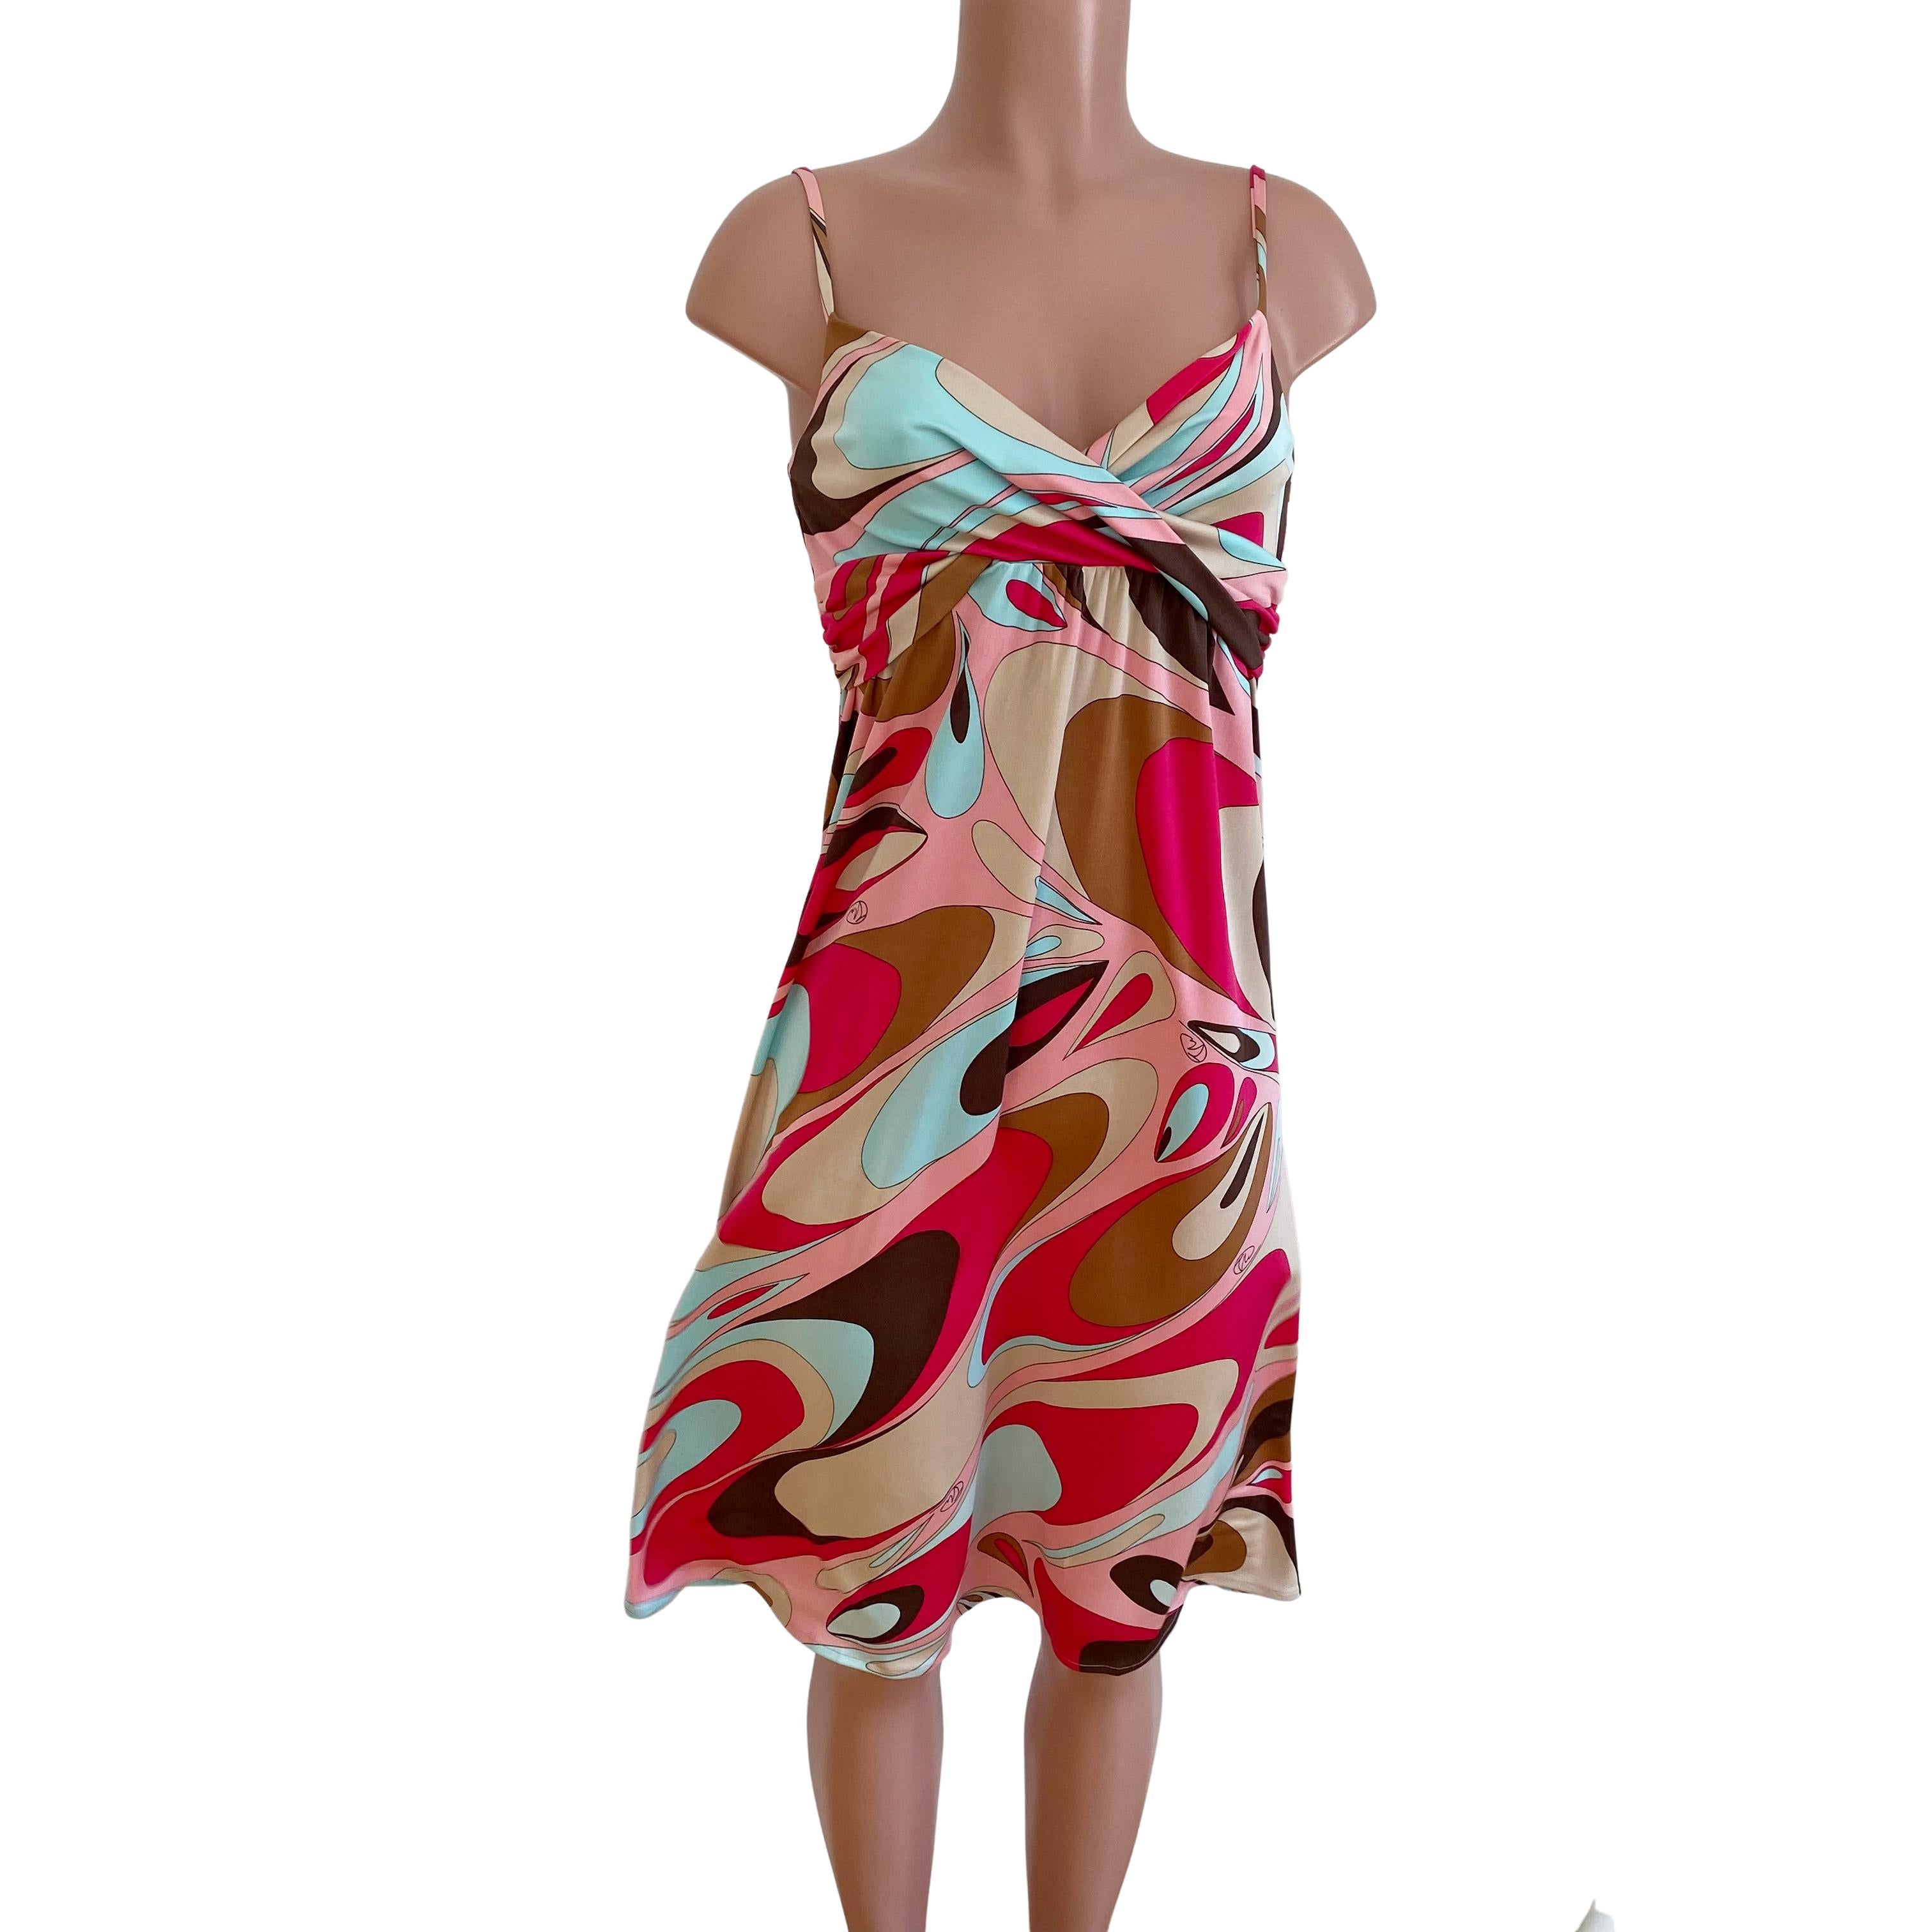 Twist front slip dress with adjustable shoulder straps for a perfect, flattering fit.
Gelato swirl print in pink, mocha and mint.
Approximately 46